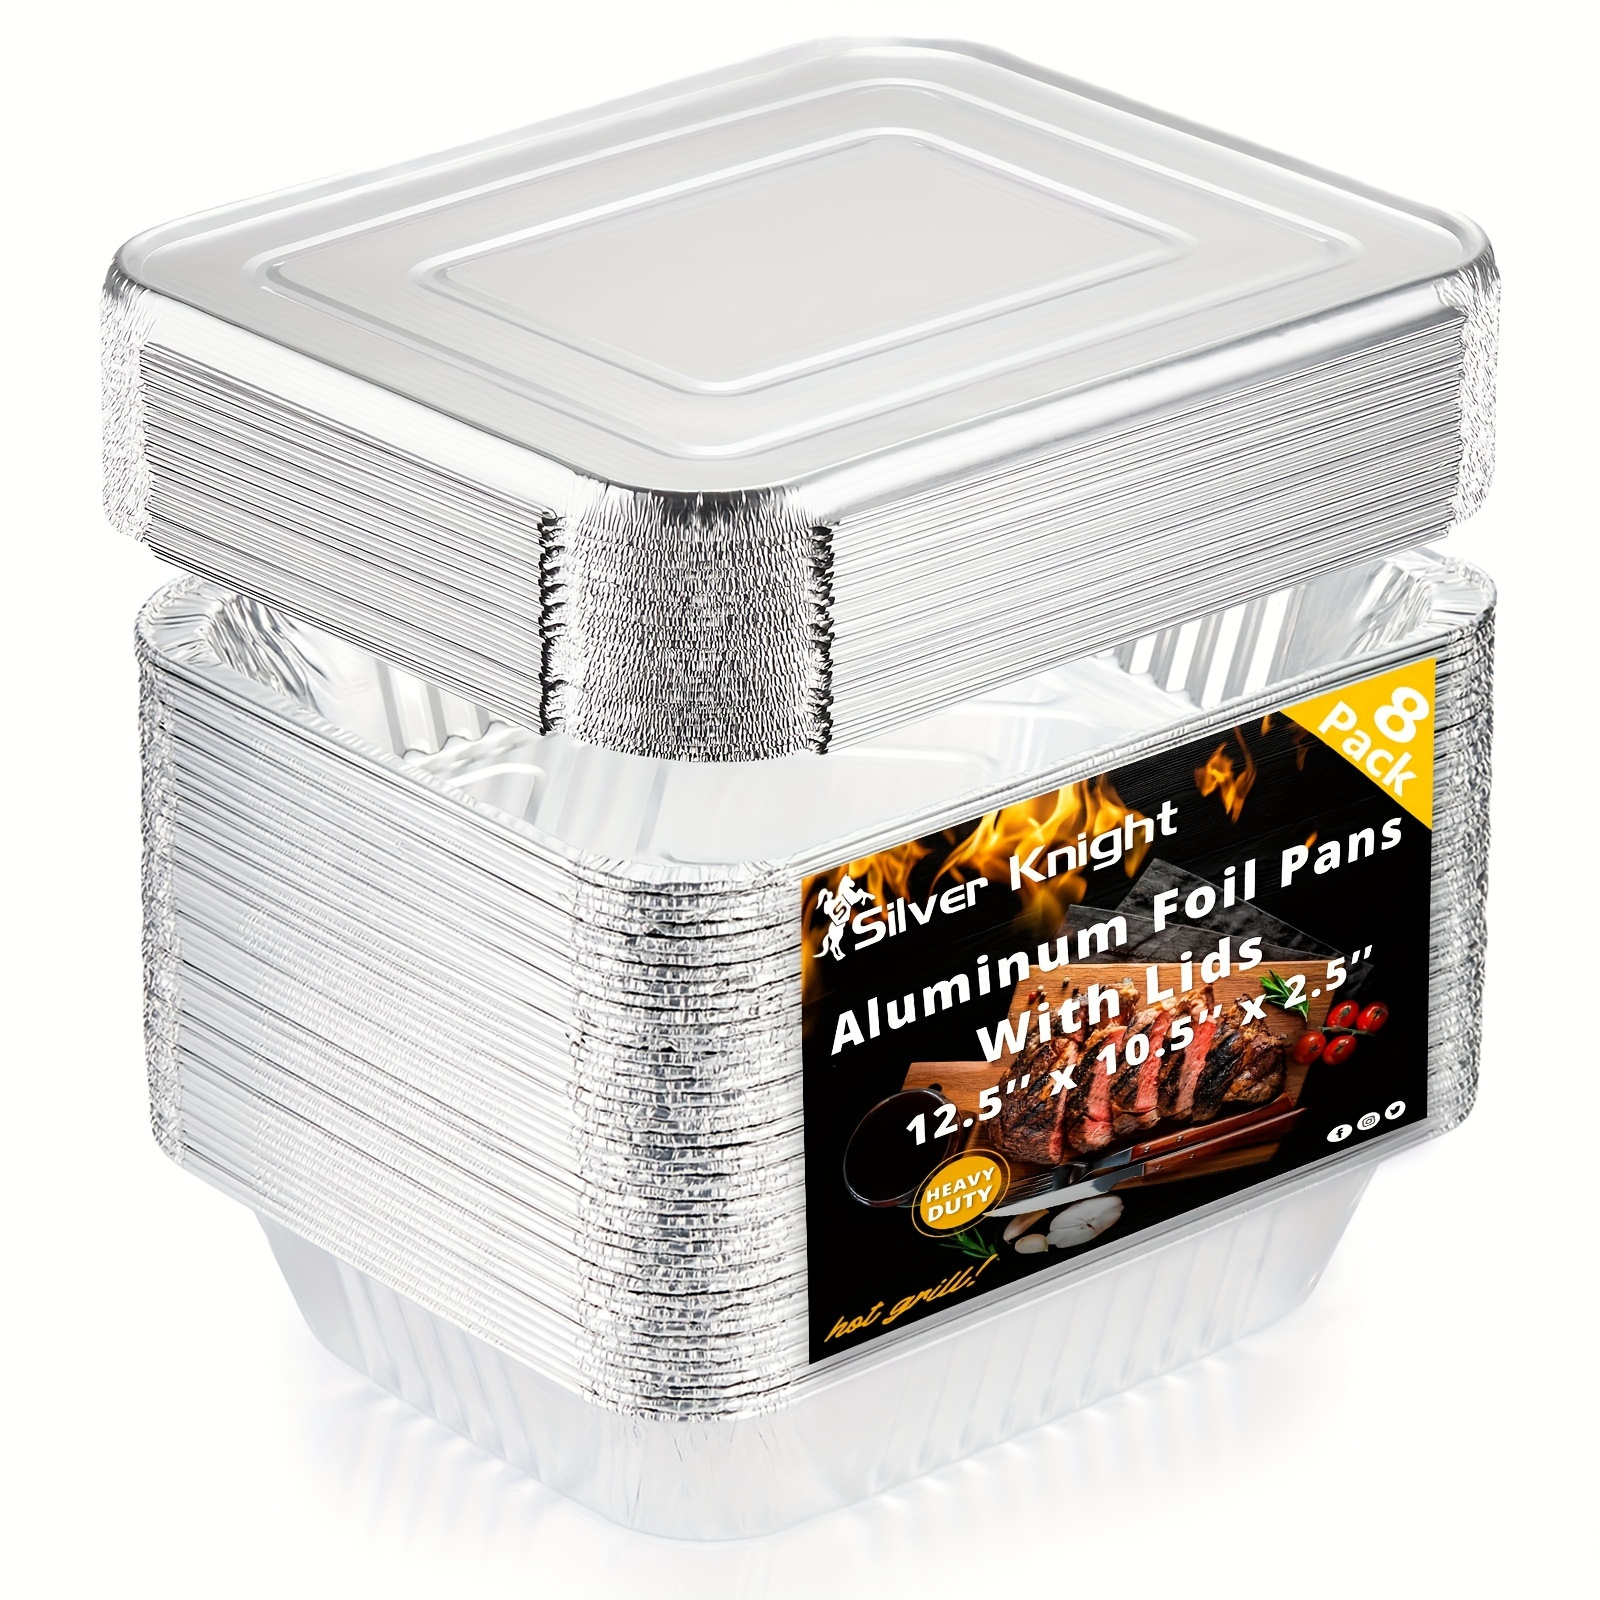 Premium Silver Aluminum Foil Sheets Pre Cut Pop Up, 12 x 10.75 - For  Restaurants, Lunch, Takeout, To Go, Lunch bag, Sandwich, Catering, Kitchen